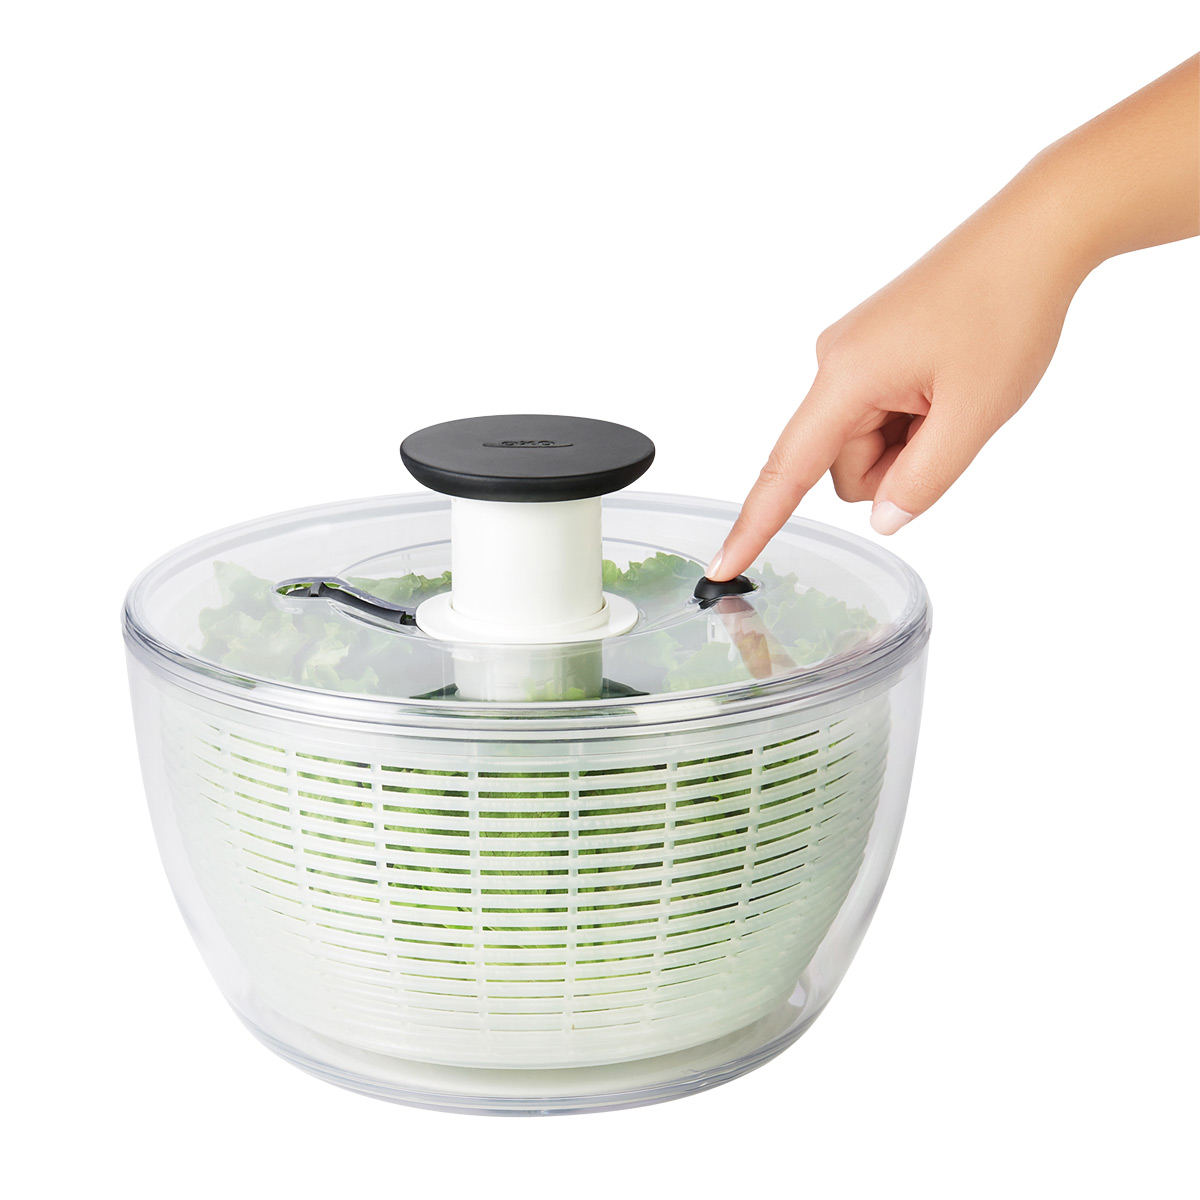 https://www.containerstore.com/catalogimages/335244/10073155-OXO-Salad-Spinner-Clear-Ven.jpg